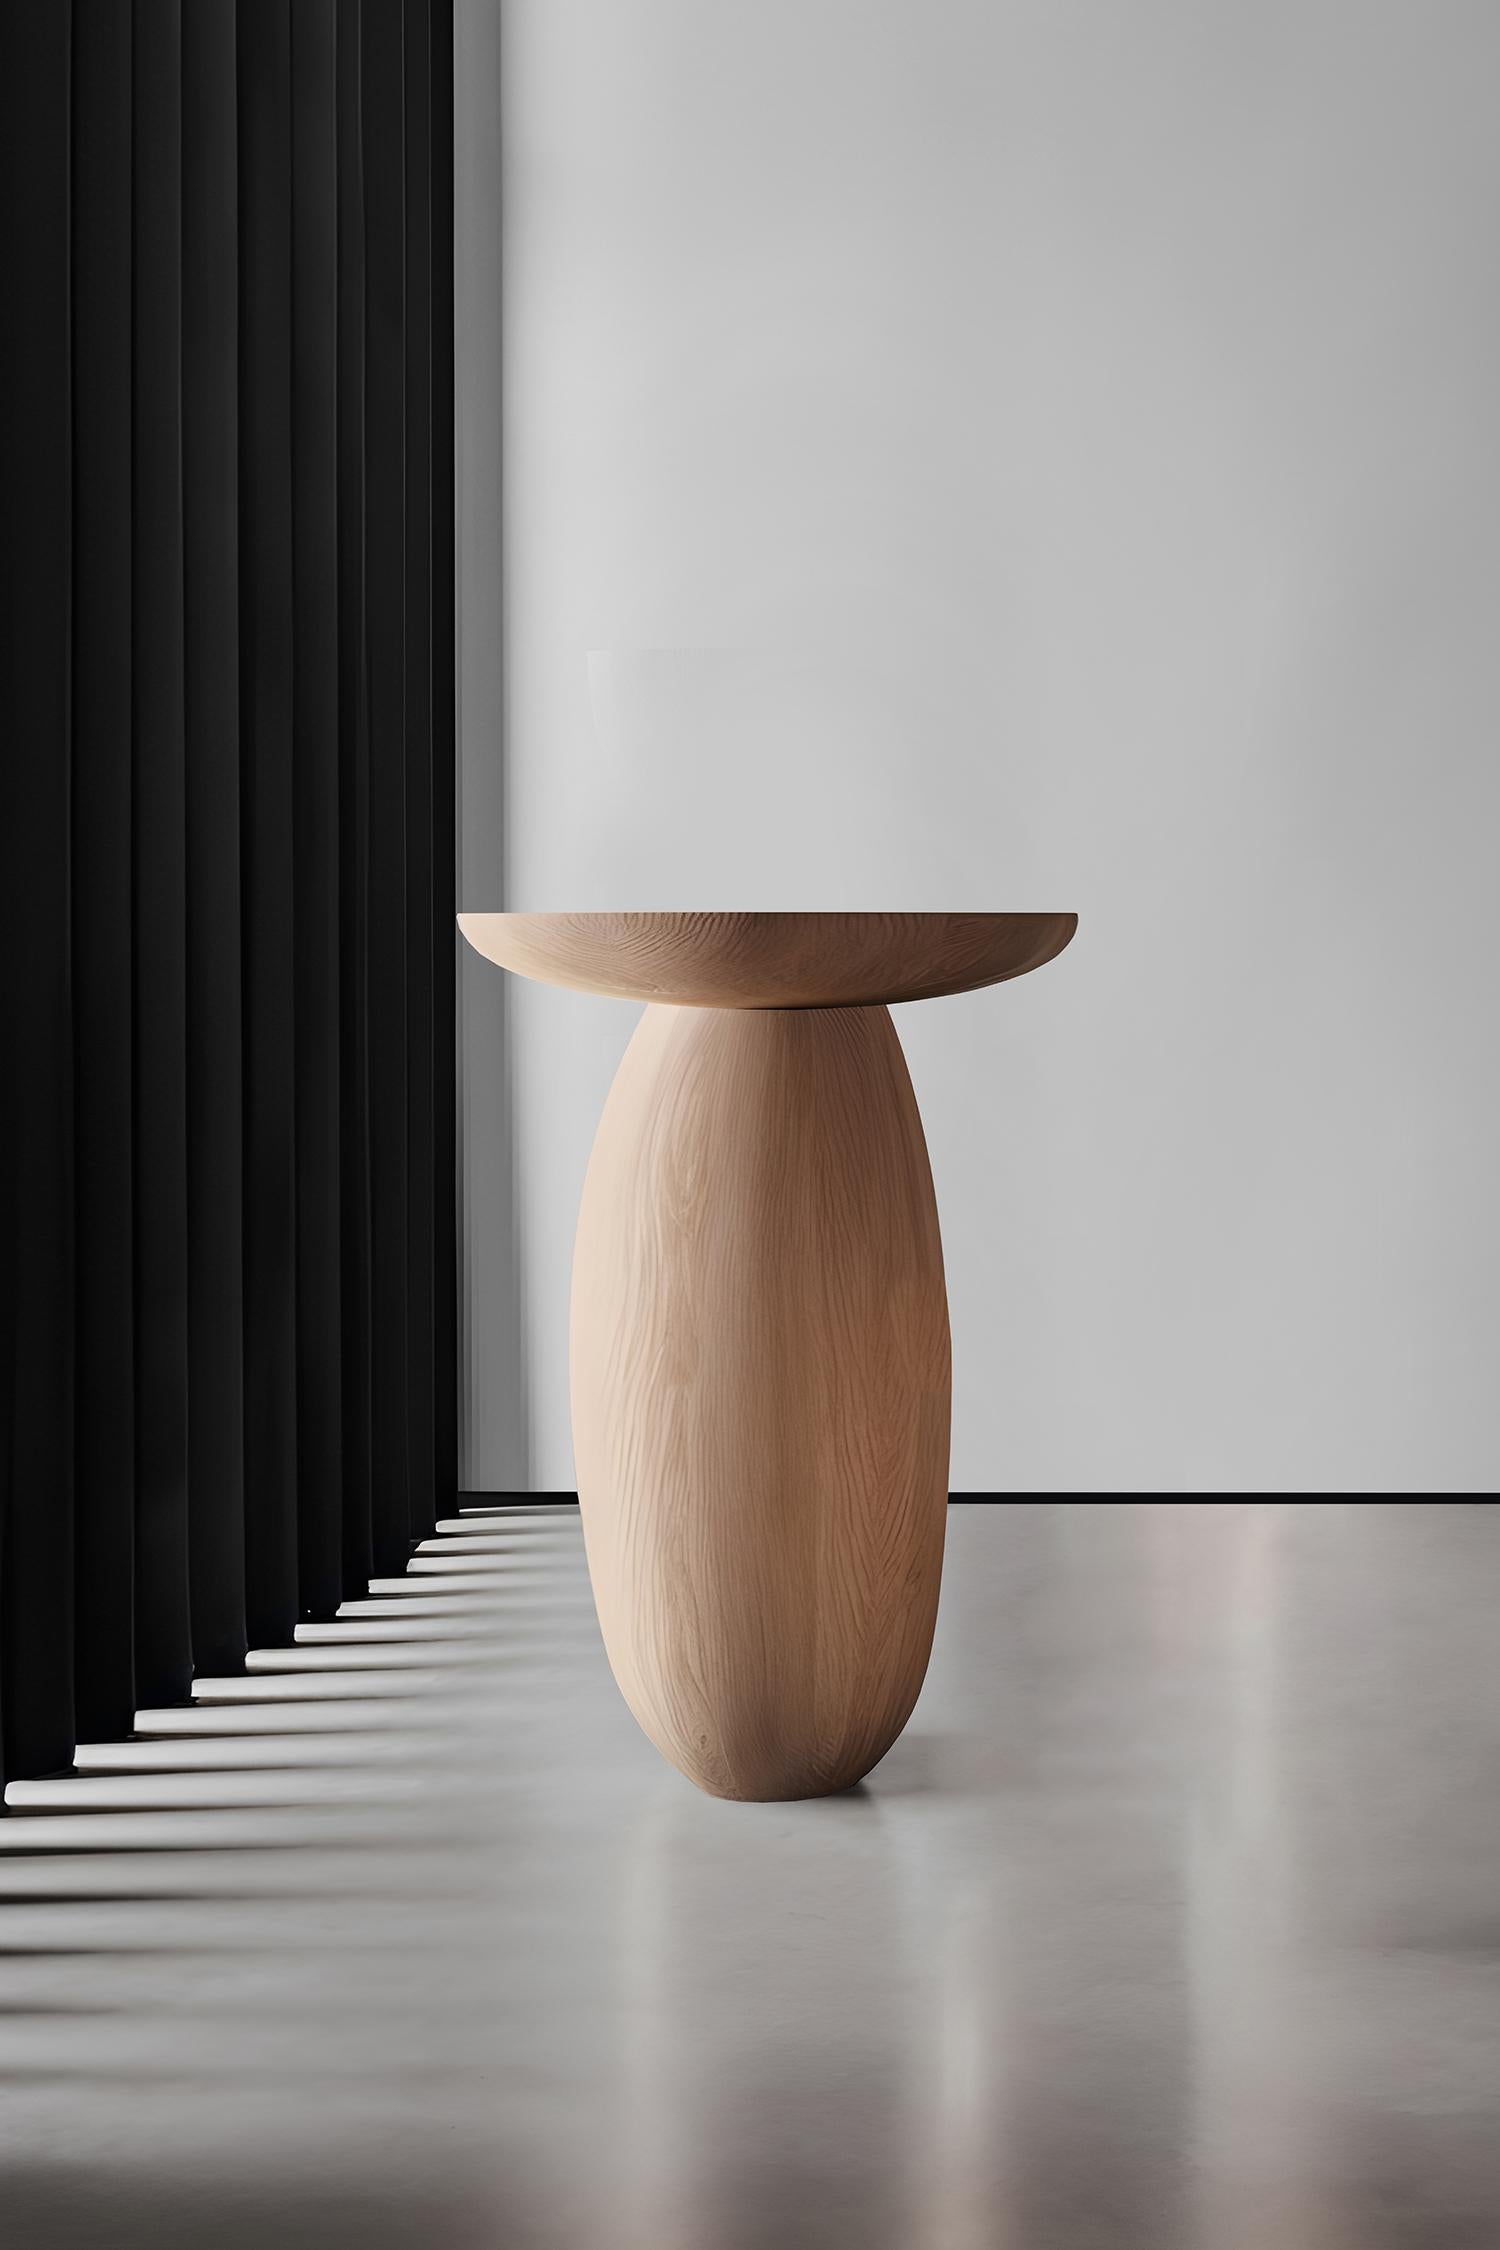 Introducing the Samu Collection by NONO, where simplicity meets elegance in the form of sculptural stools, side tables, and plinths. Each piece in this collection boasts a gently domed and smooth circular top, paired with a uniquely shaped base.